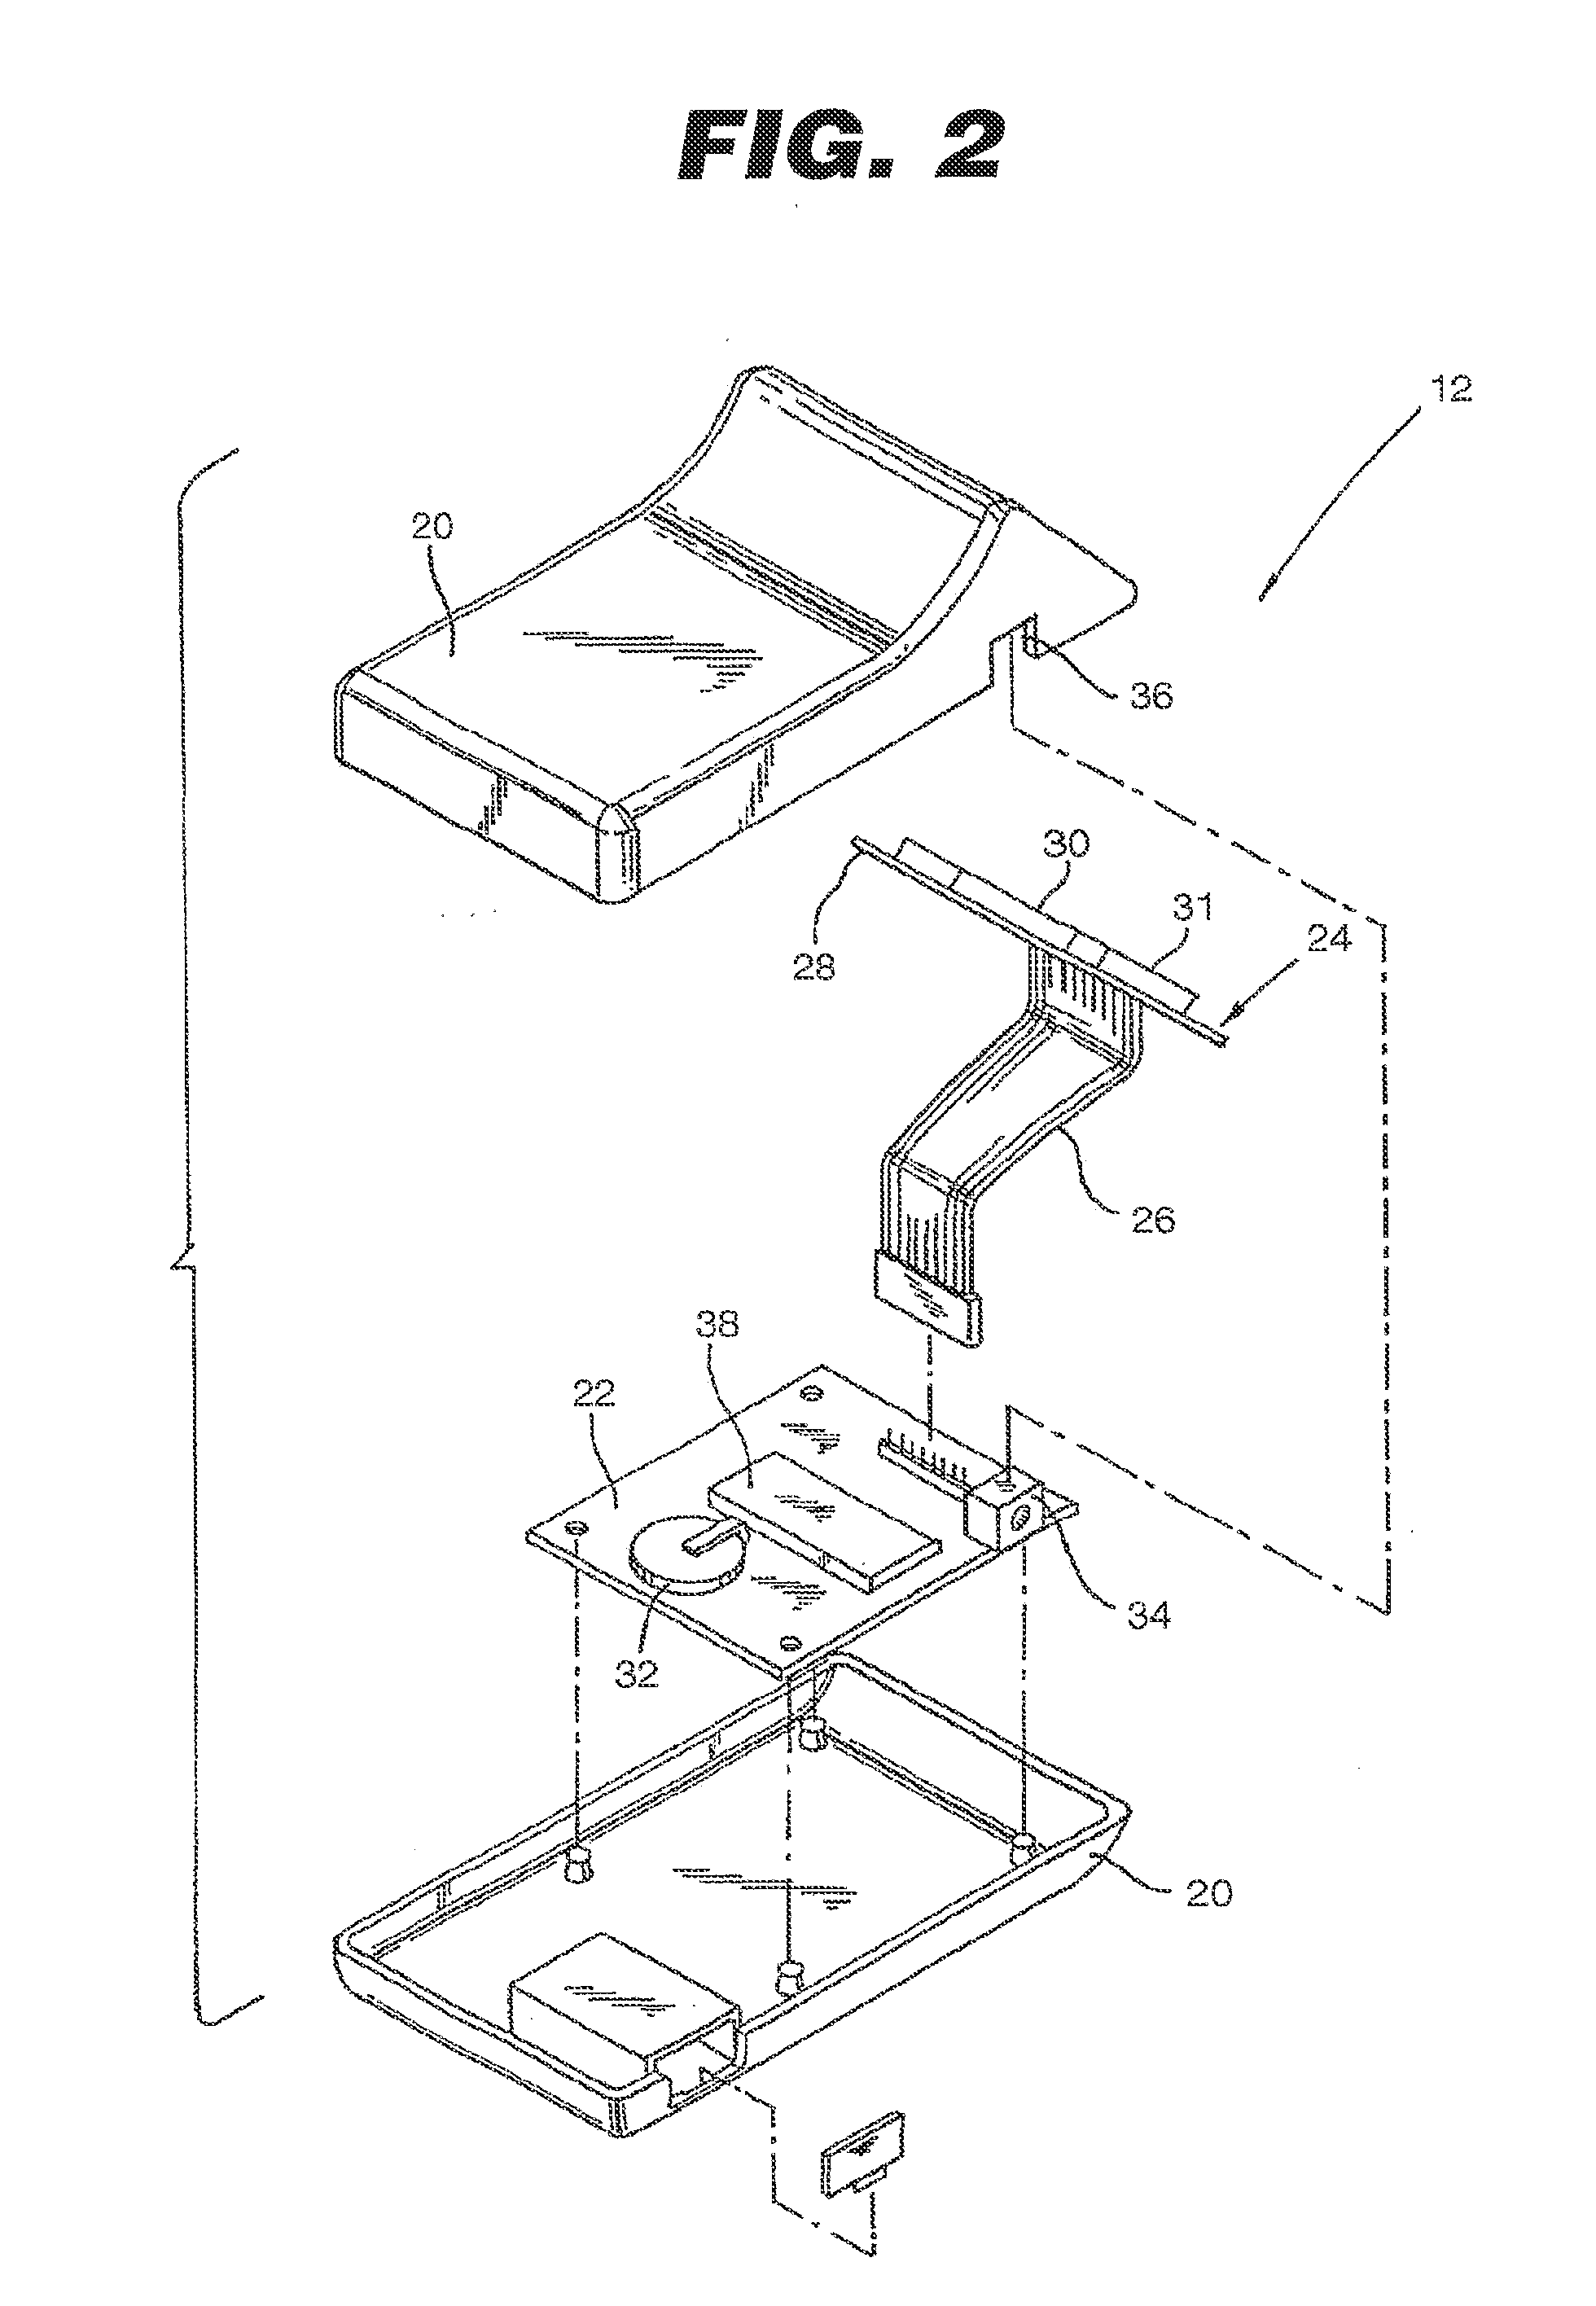 Apparatus and method for mounting a therapeutic device